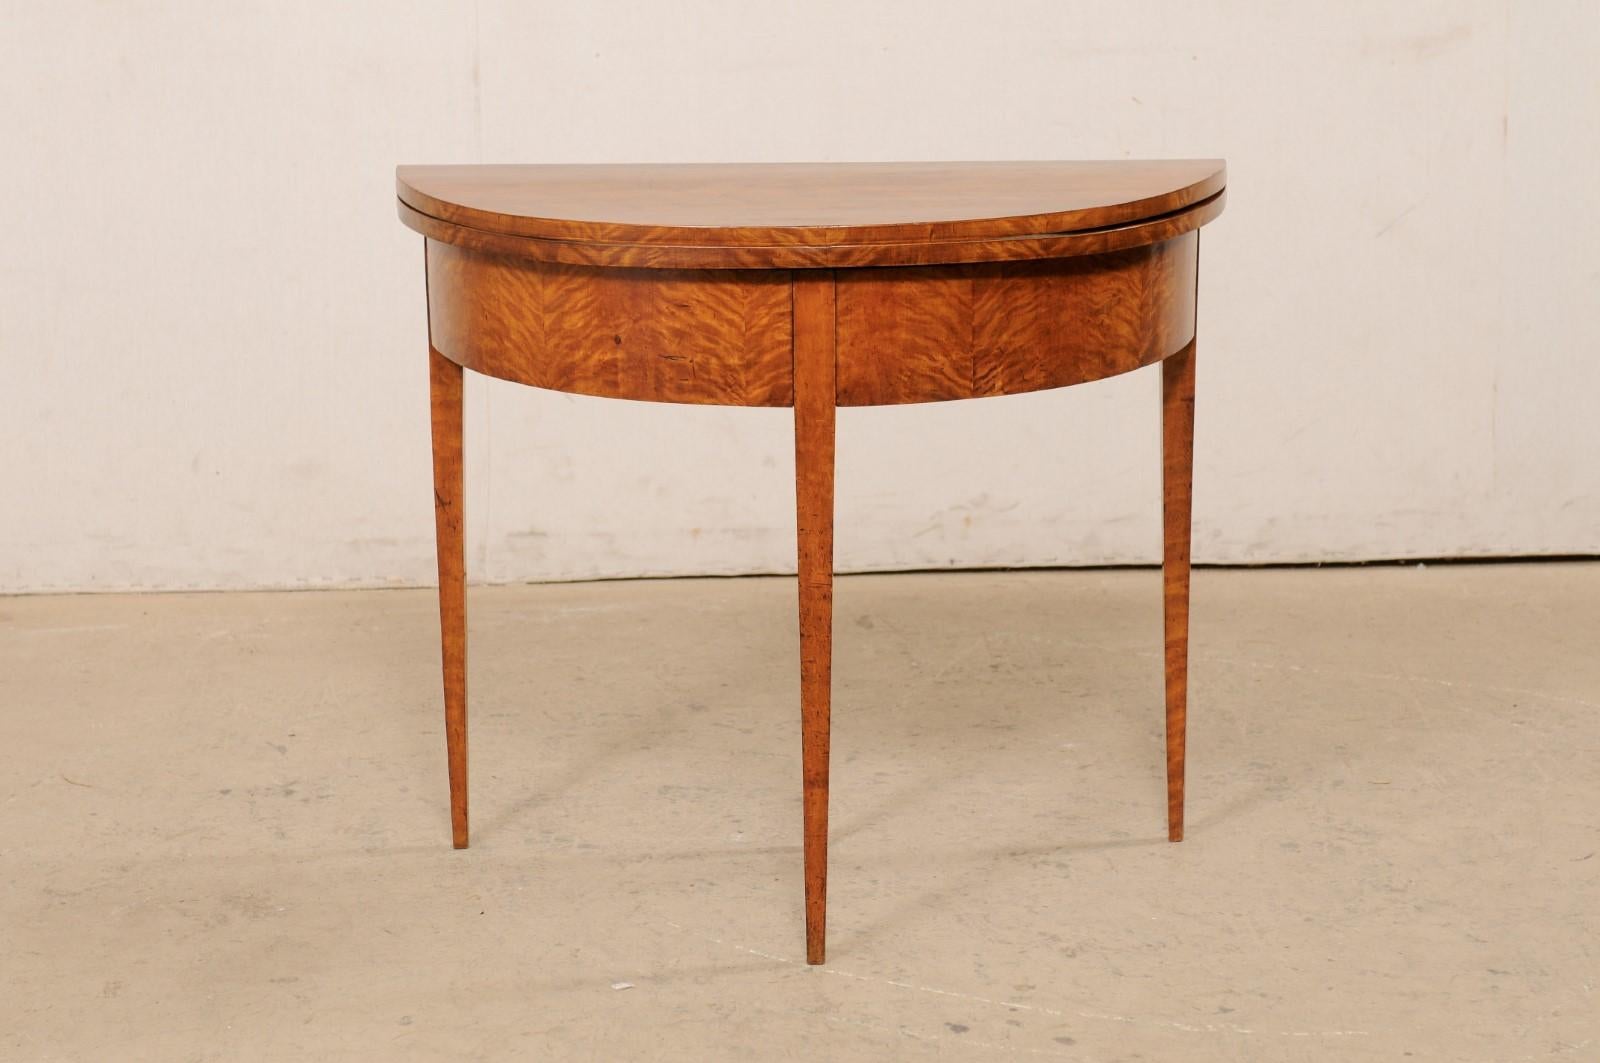 A Swedish Neoclassical style demi-lune table, which converts to a round table, circa 1820's. This antique table from Sweden features a half moon top over a smooth/rounded apron, and is raised upon squared legs, that gently taper towards their feet.